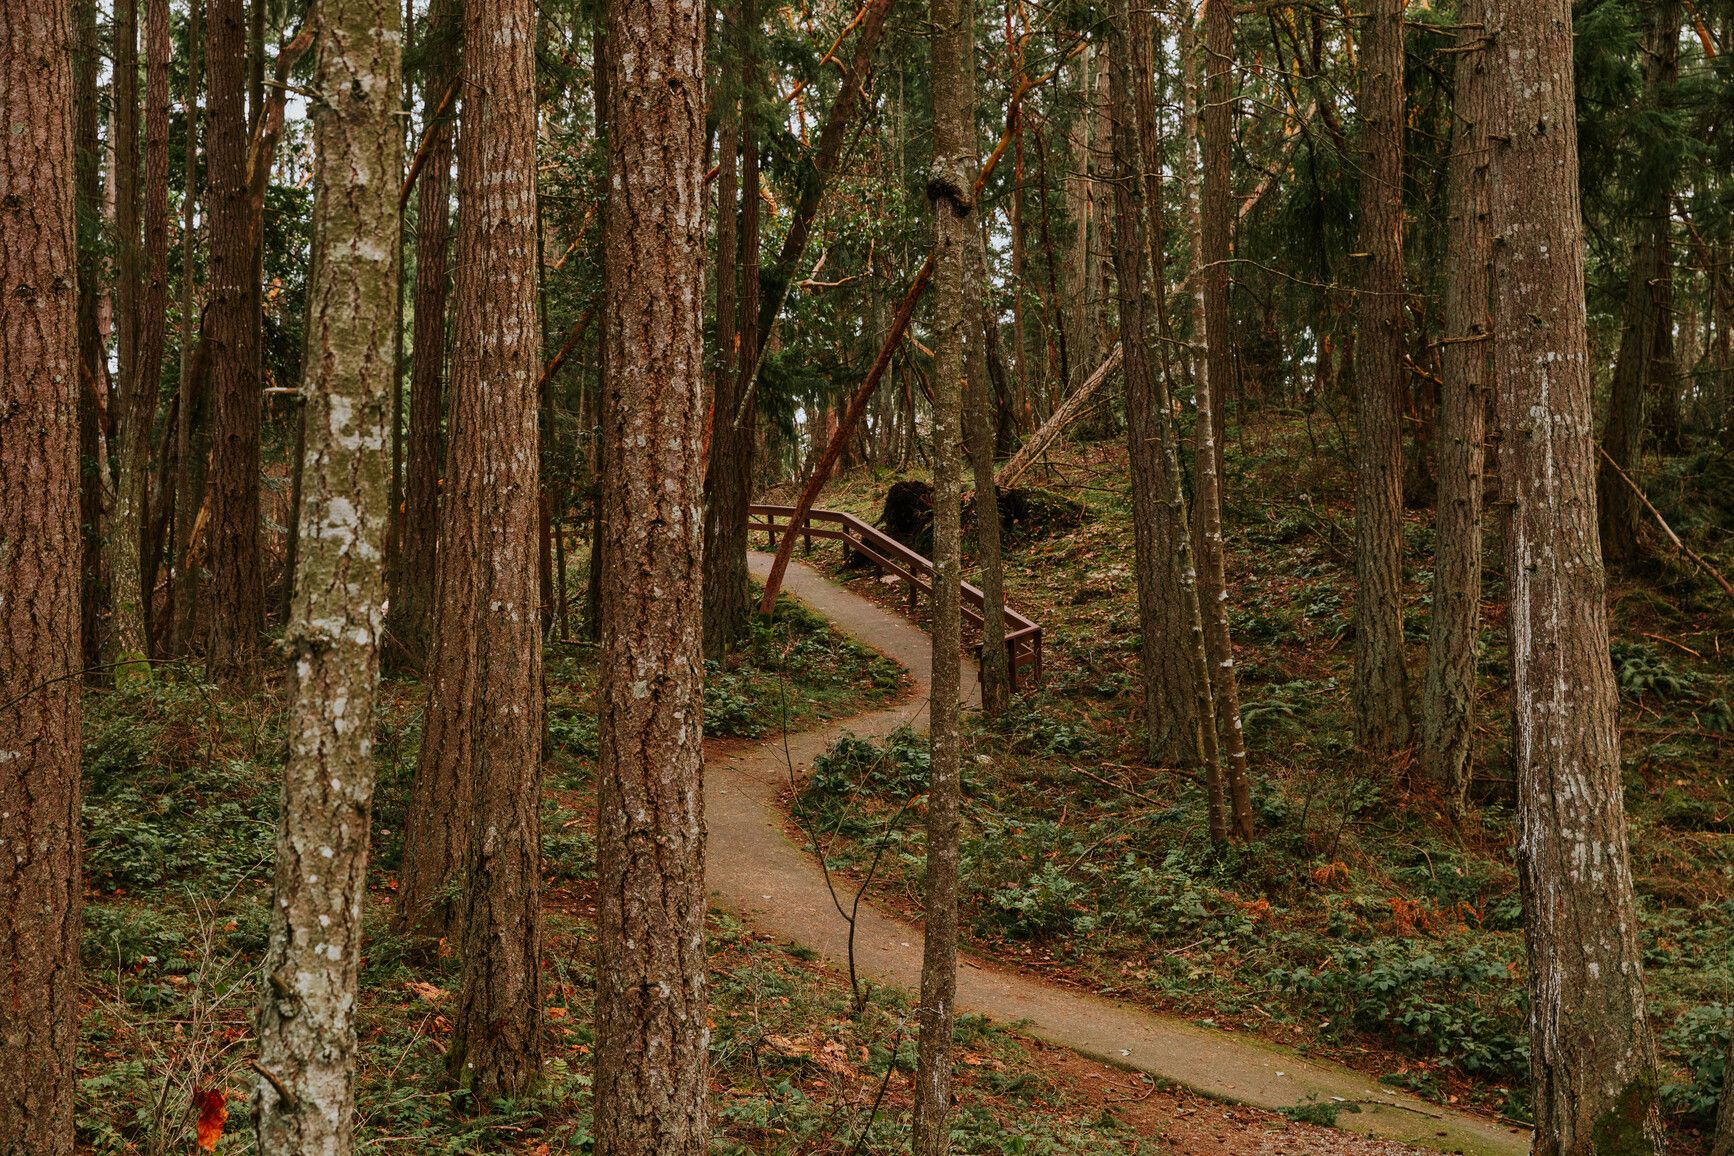 A trail through the forest in Petroglyph Park.